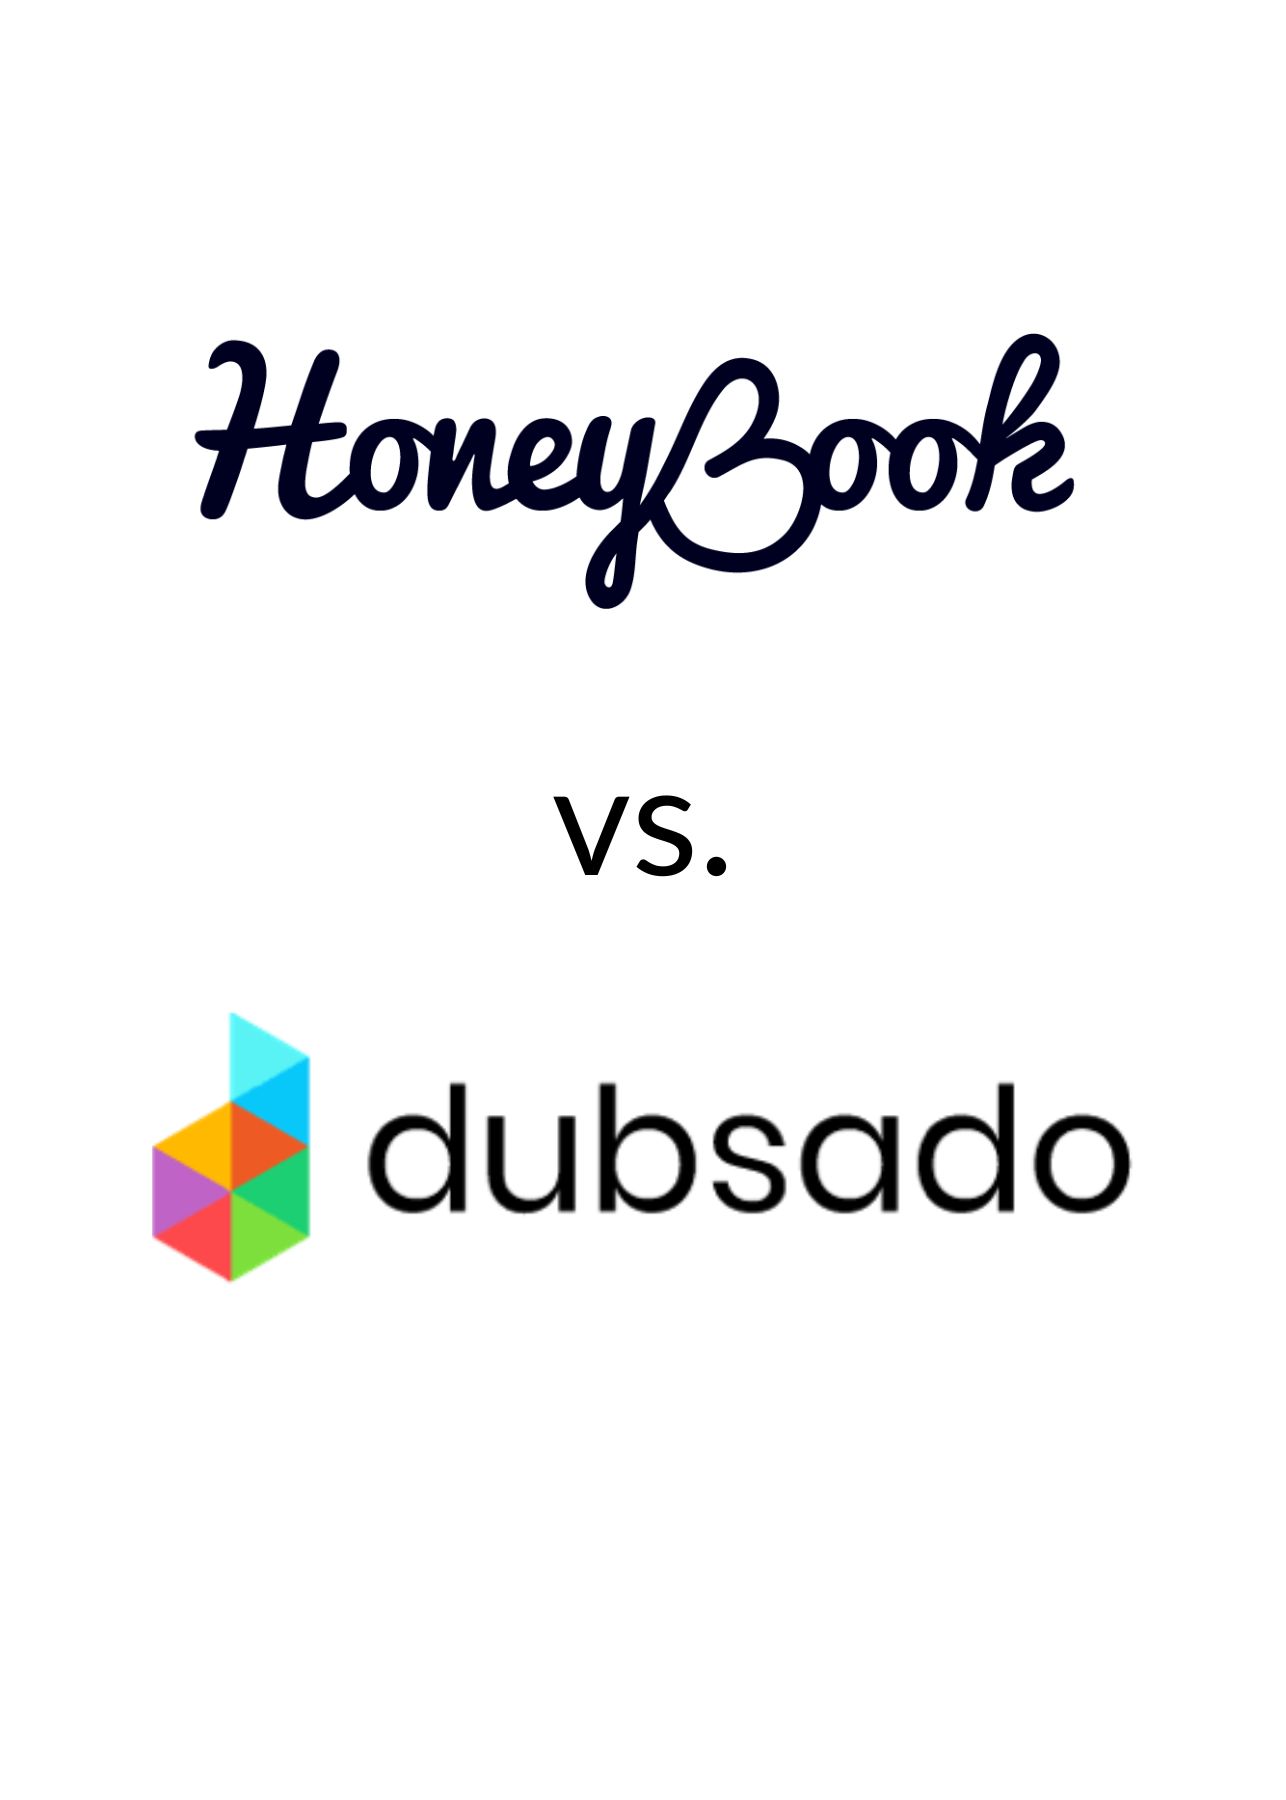 Honeybook logo and the Dubsado logo on a white background.